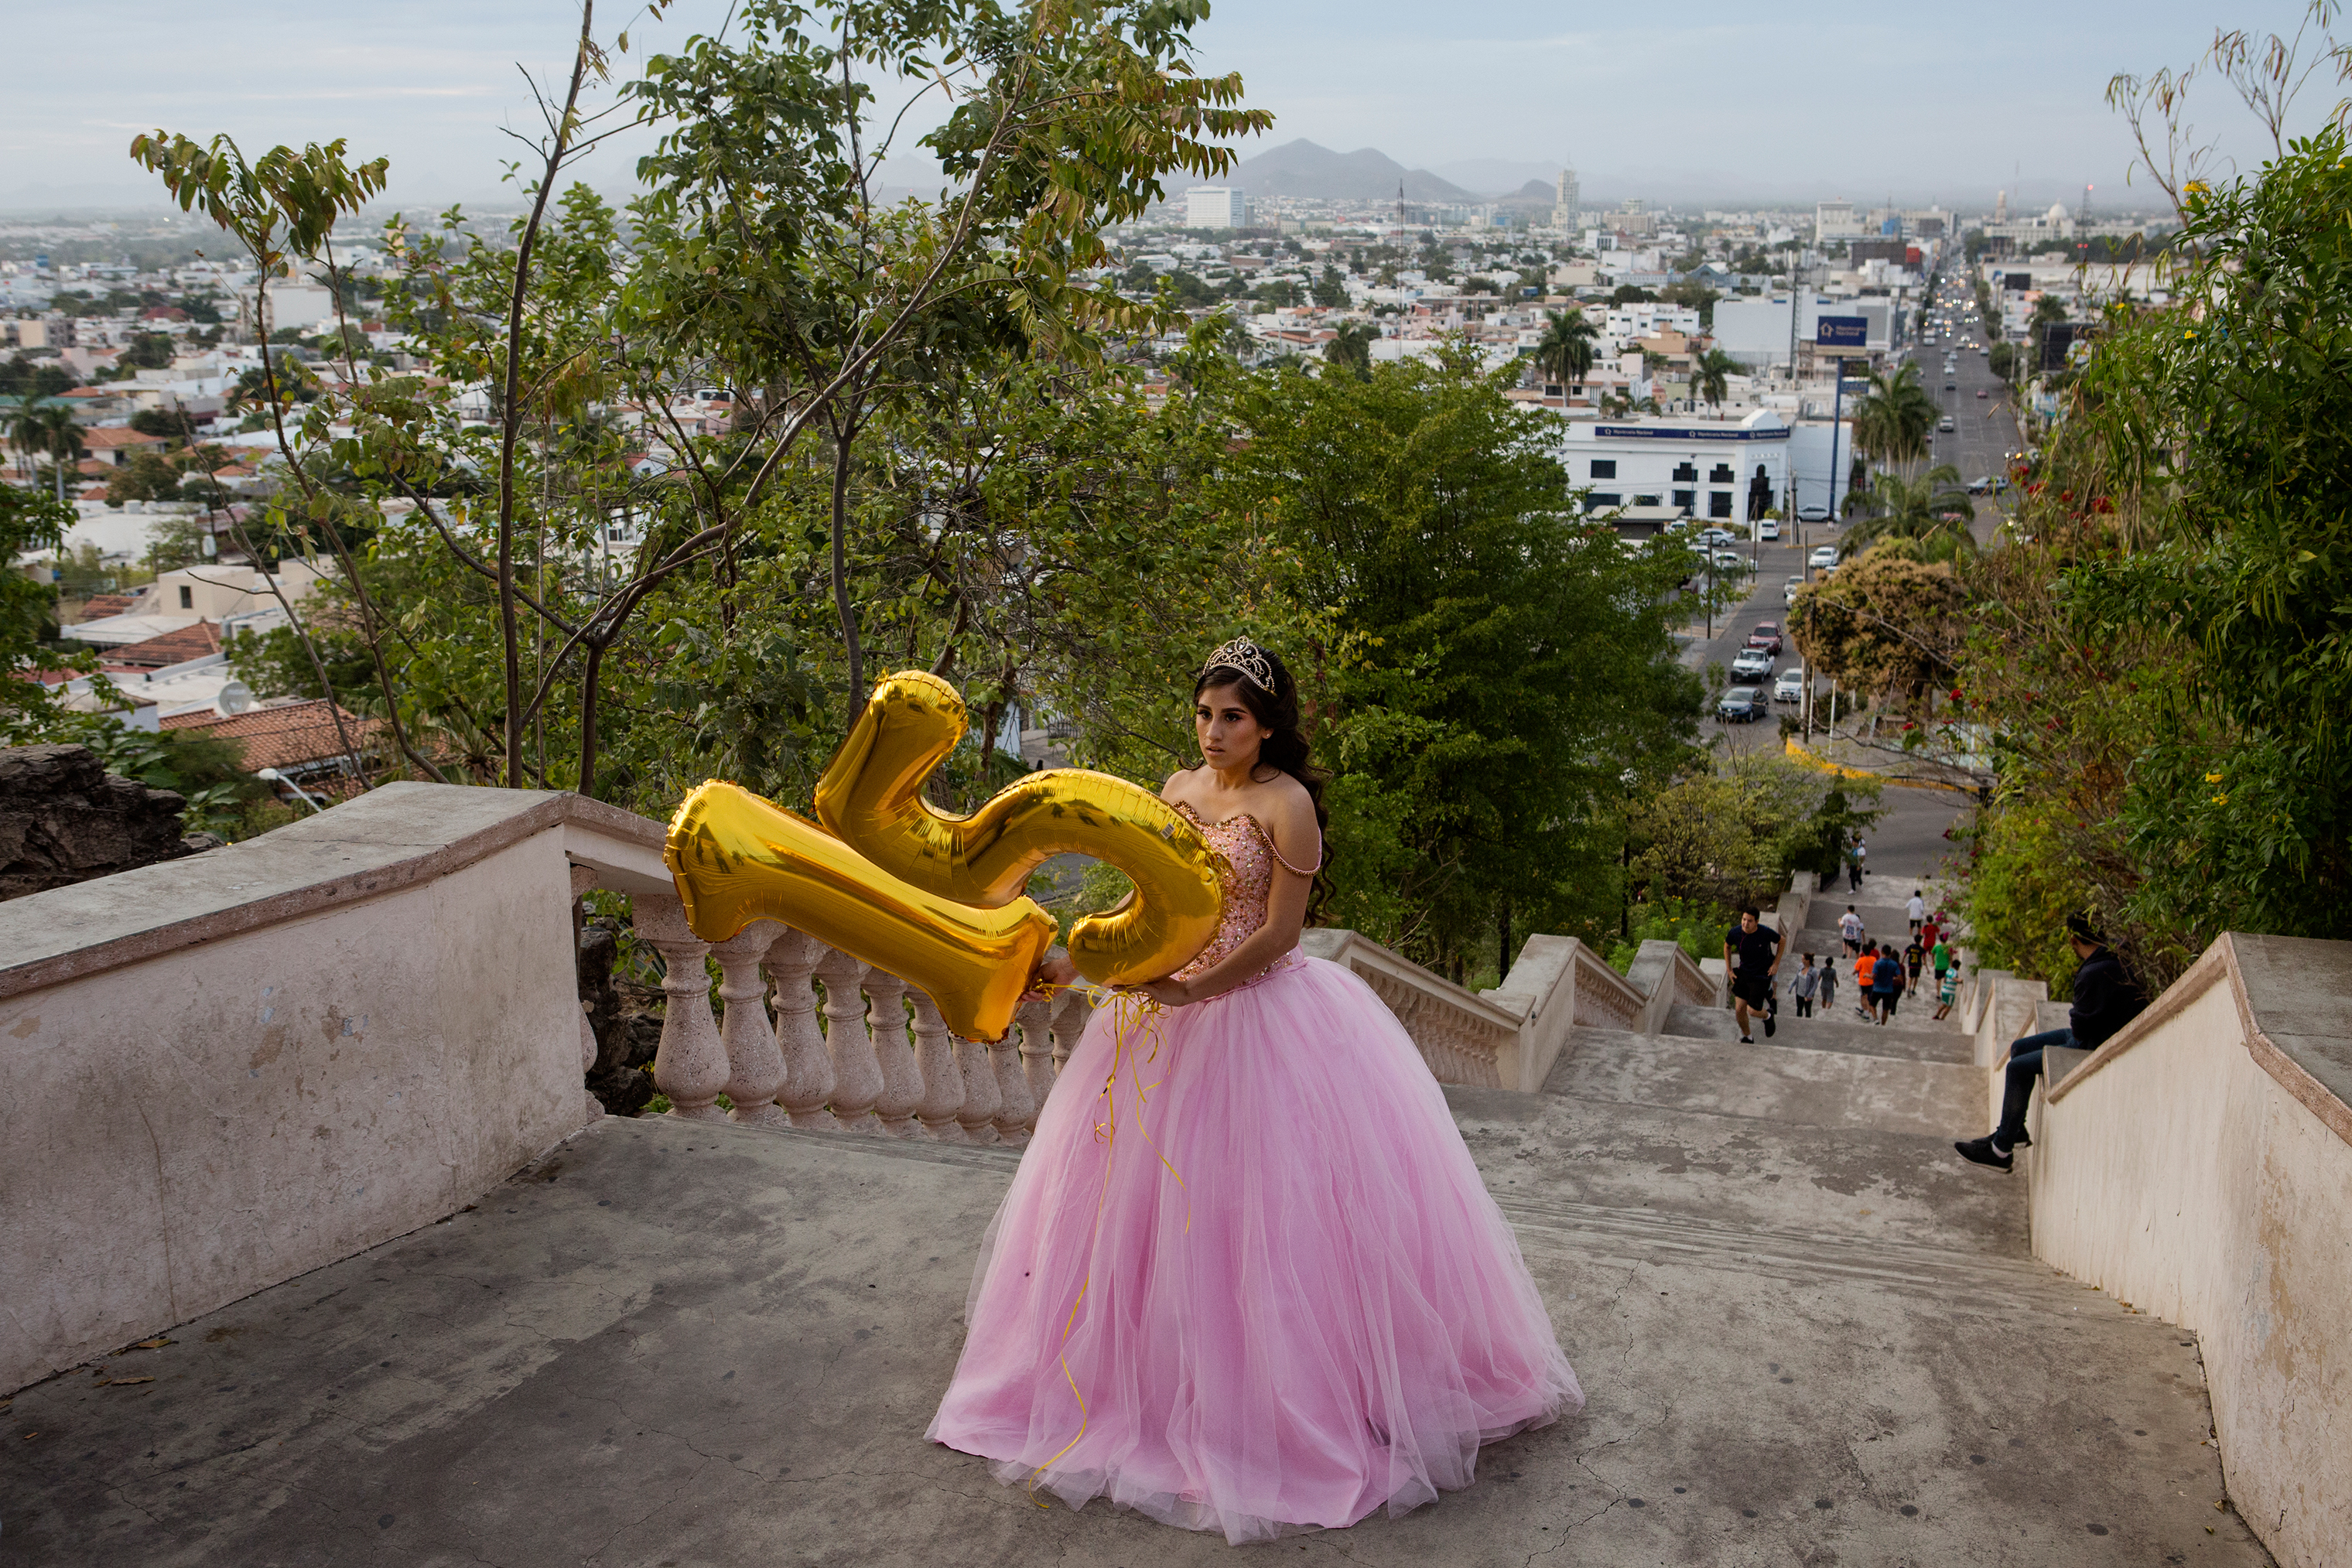 Lacey Carillo Quintera, 15, celebrates her quinceañera by taking photos with her family at the La Lomita overlook in Culiacán, Sinaloa, in February. (Kirsten Luce for TIME)